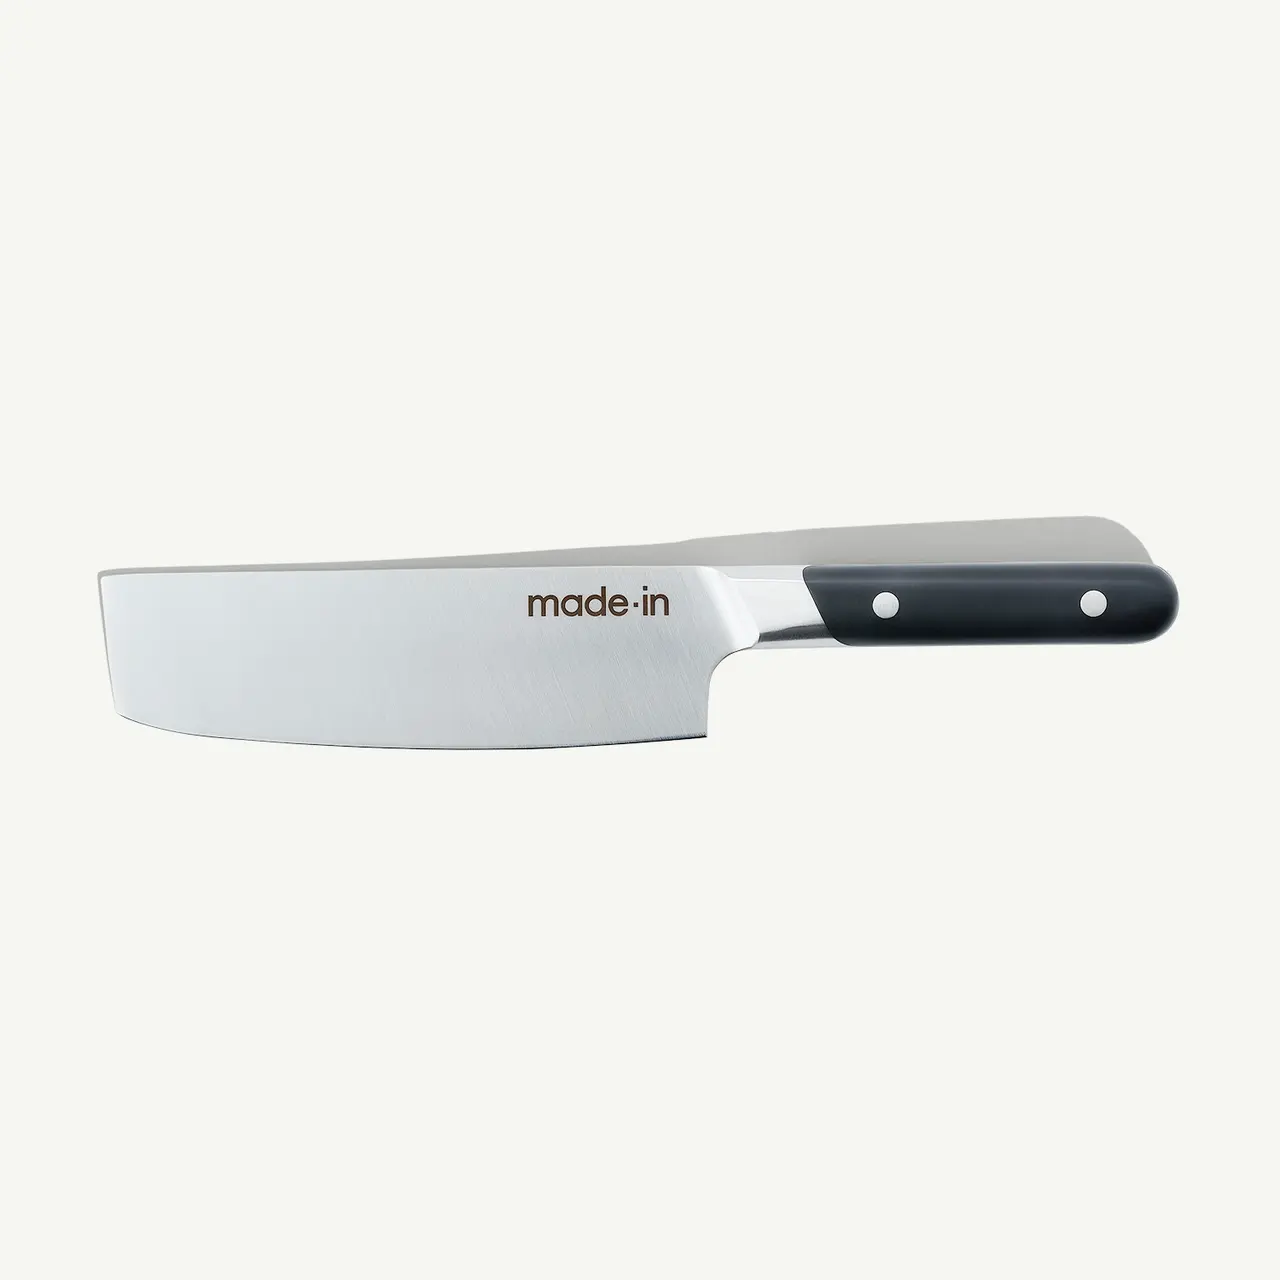 A stainless steel chef's knife with a black handle and the text "made.in" printed on the blade is displayed against a white background.